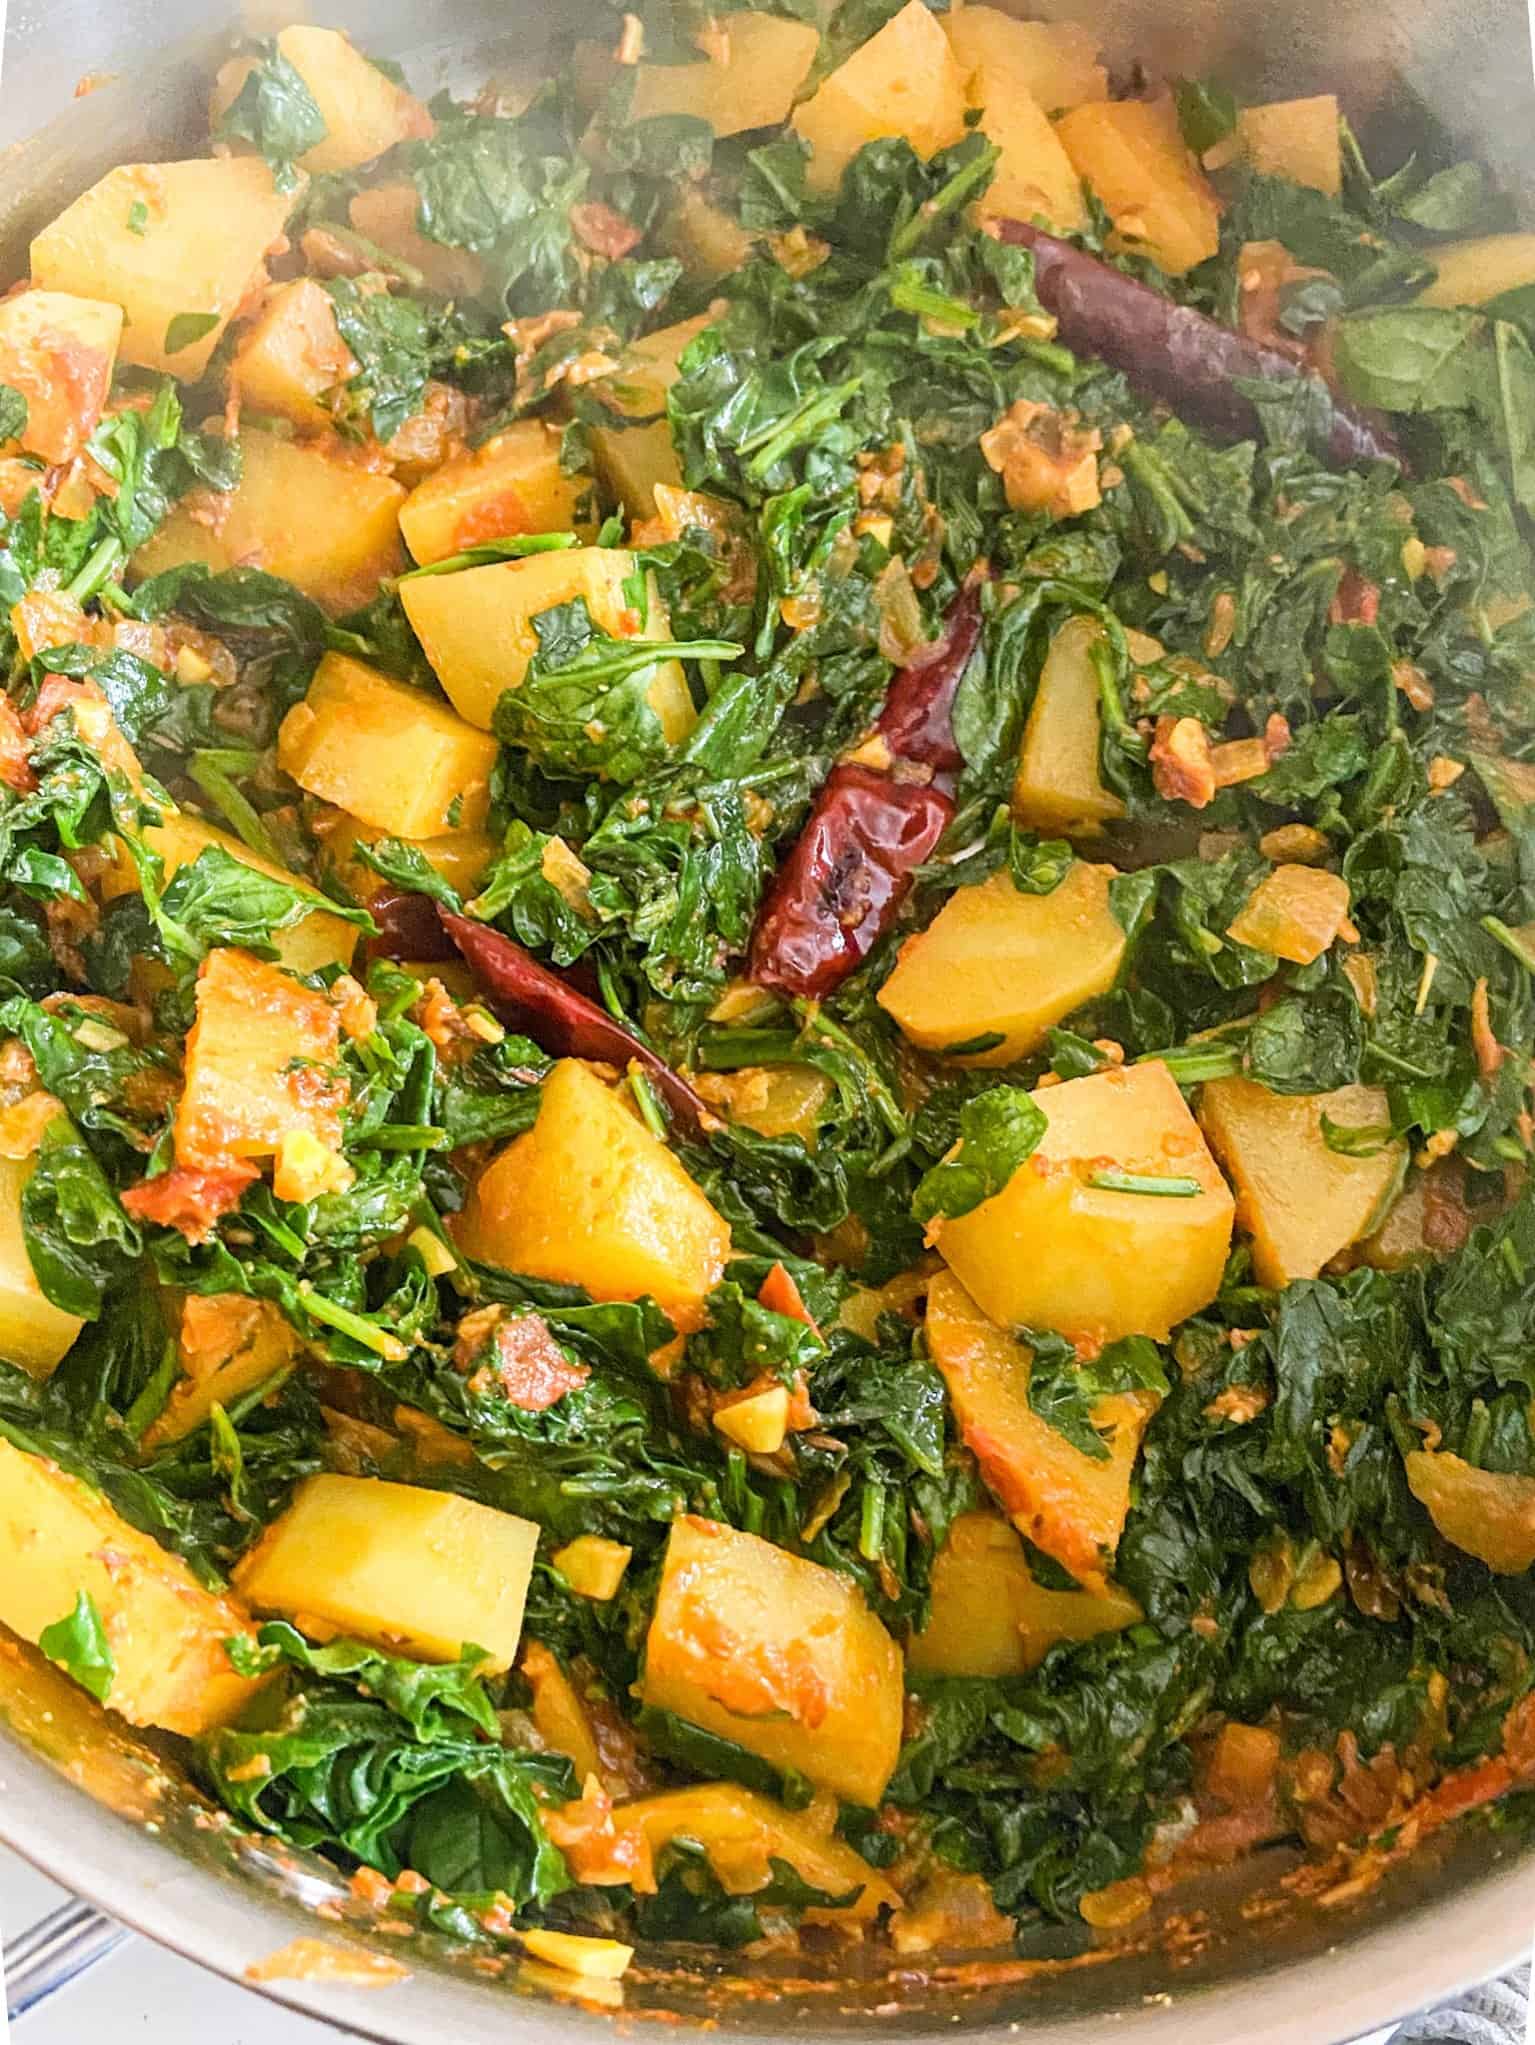 Cover the pan and let the spinach wilt. Aloo palak recipe.